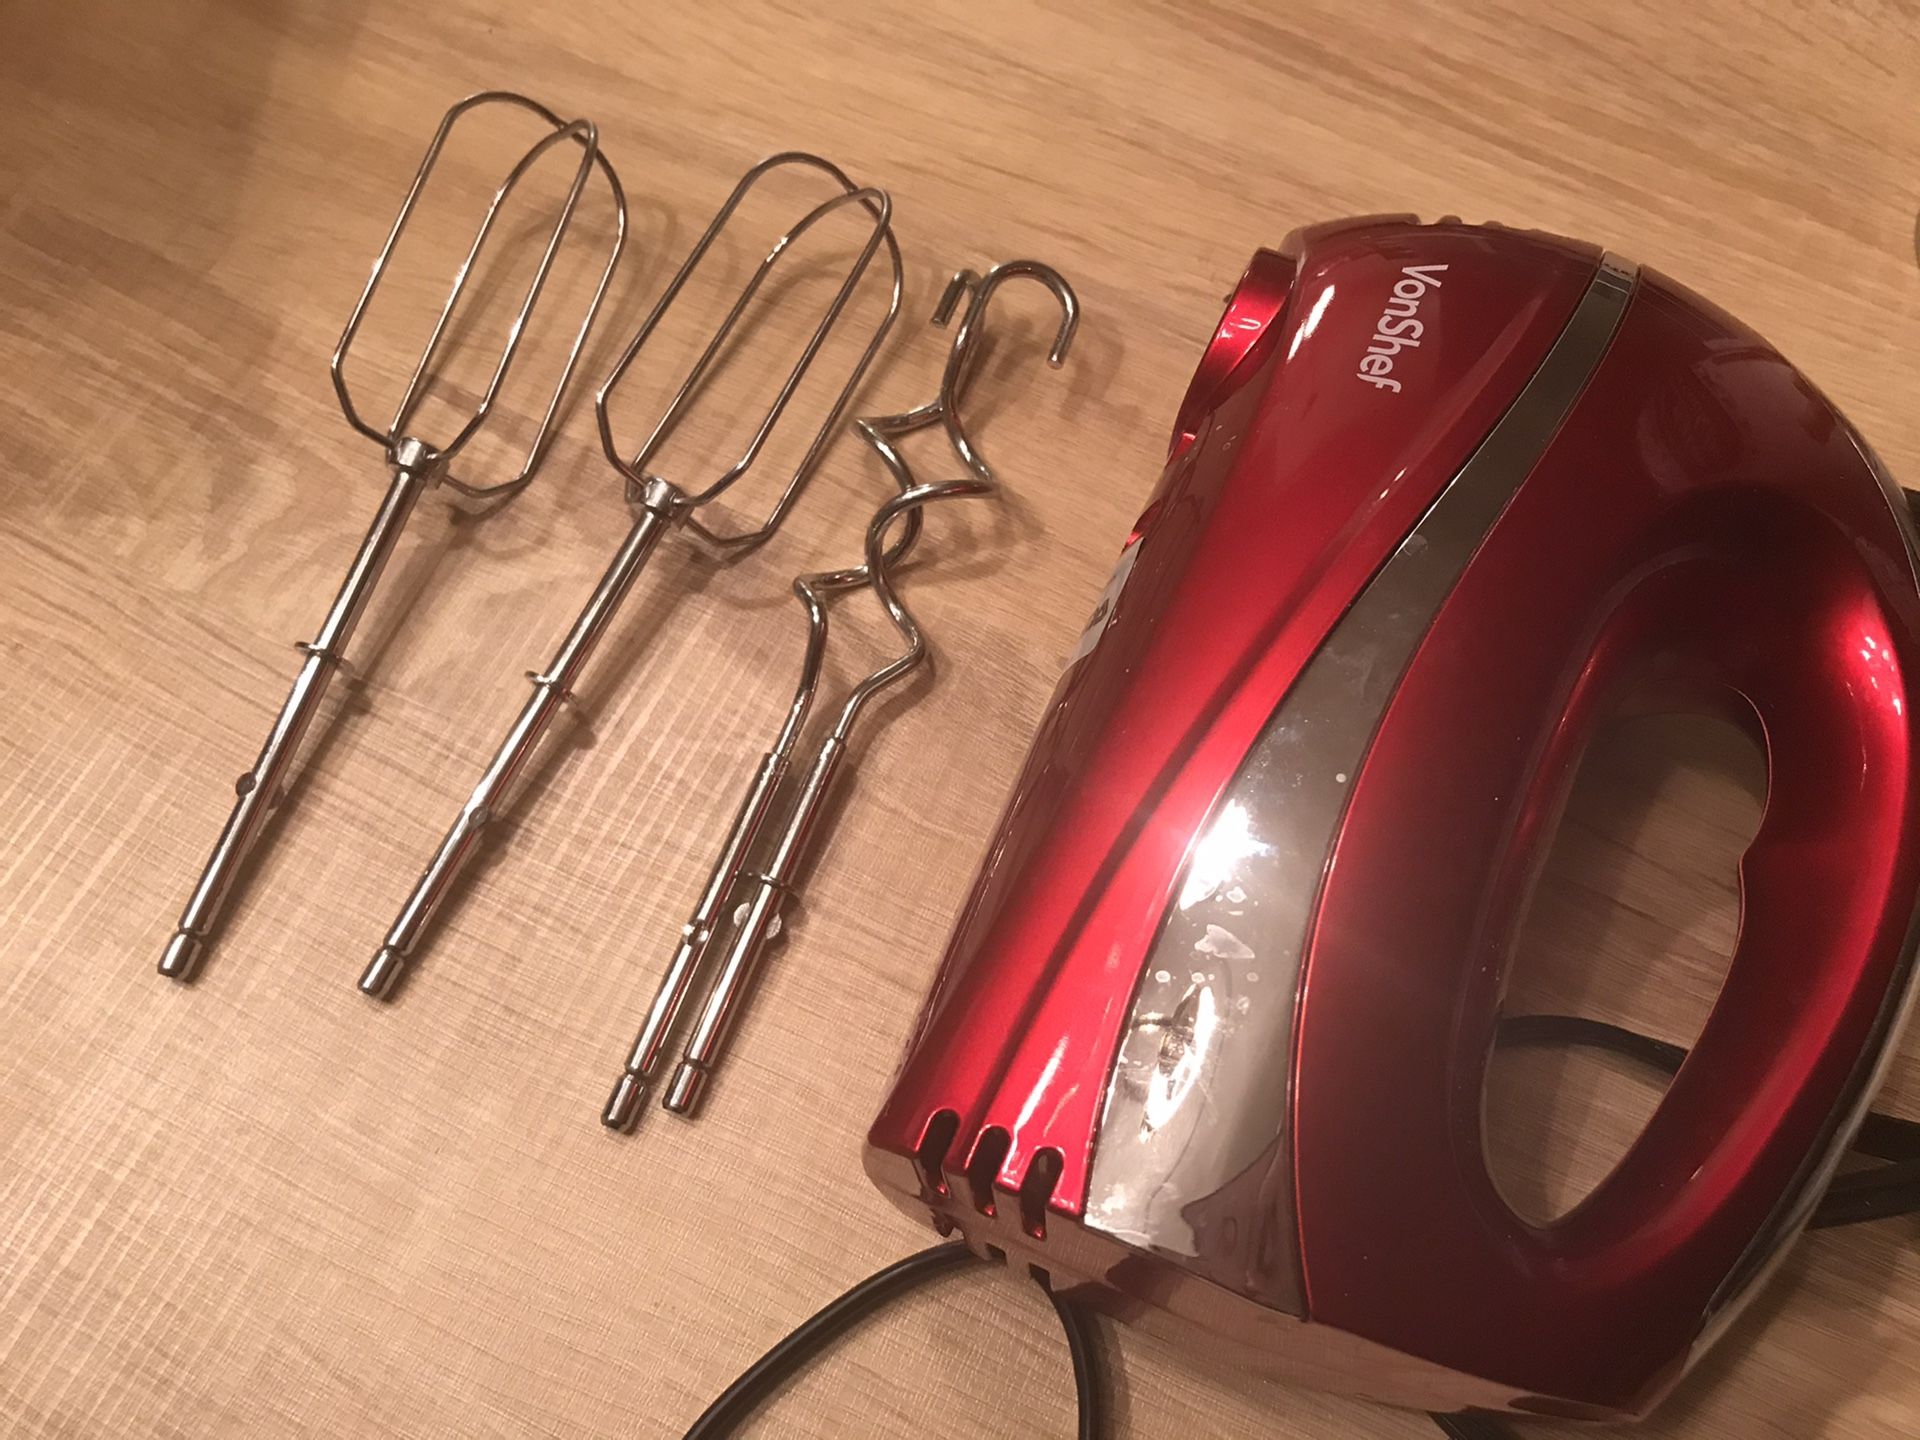 VonShef BLACK 250W Hand Mixer Whisk With Chrome Beater, Dough Hook, 5 Speed and Turbo Button + Balloon Whisk